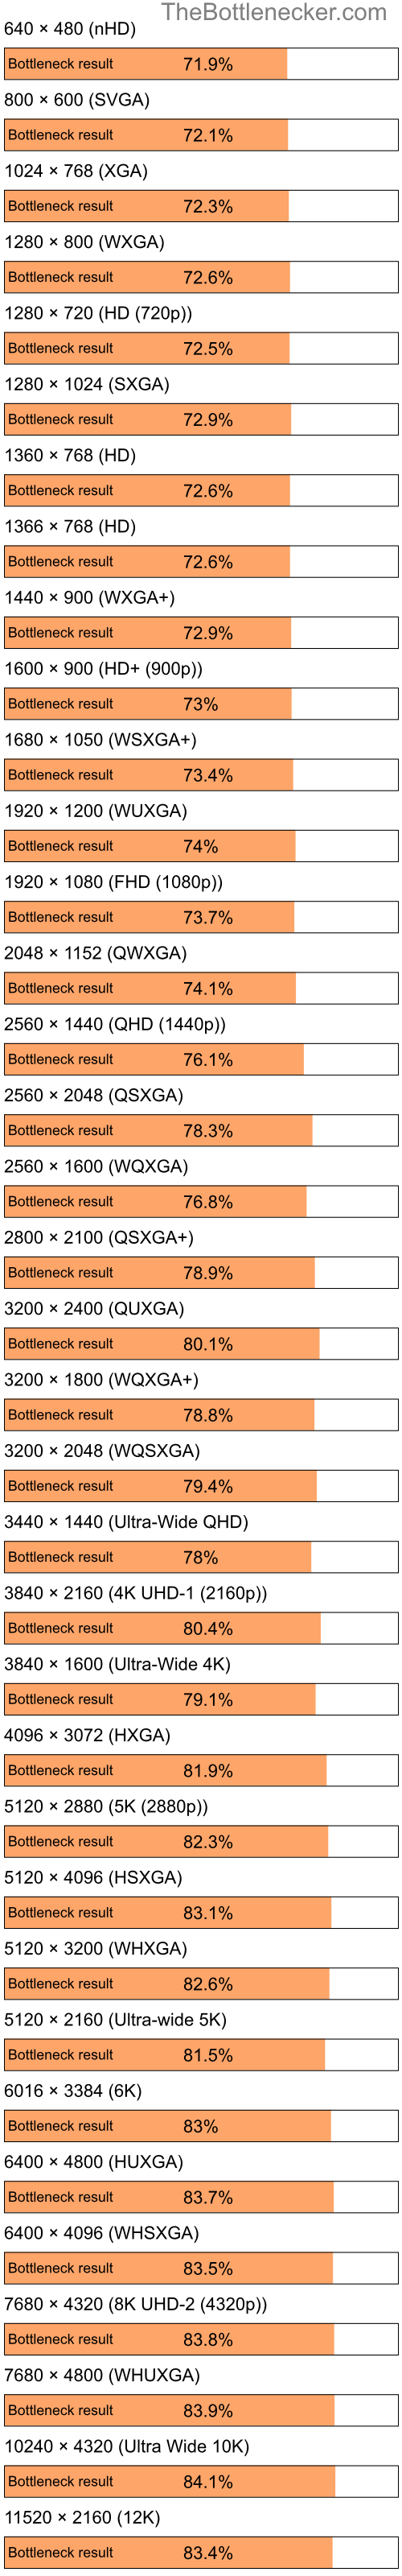 Bottleneck results by resolution for Intel Pentium 4 and AMD Mobility Radeon X700 in Graphic Card Intense Tasks